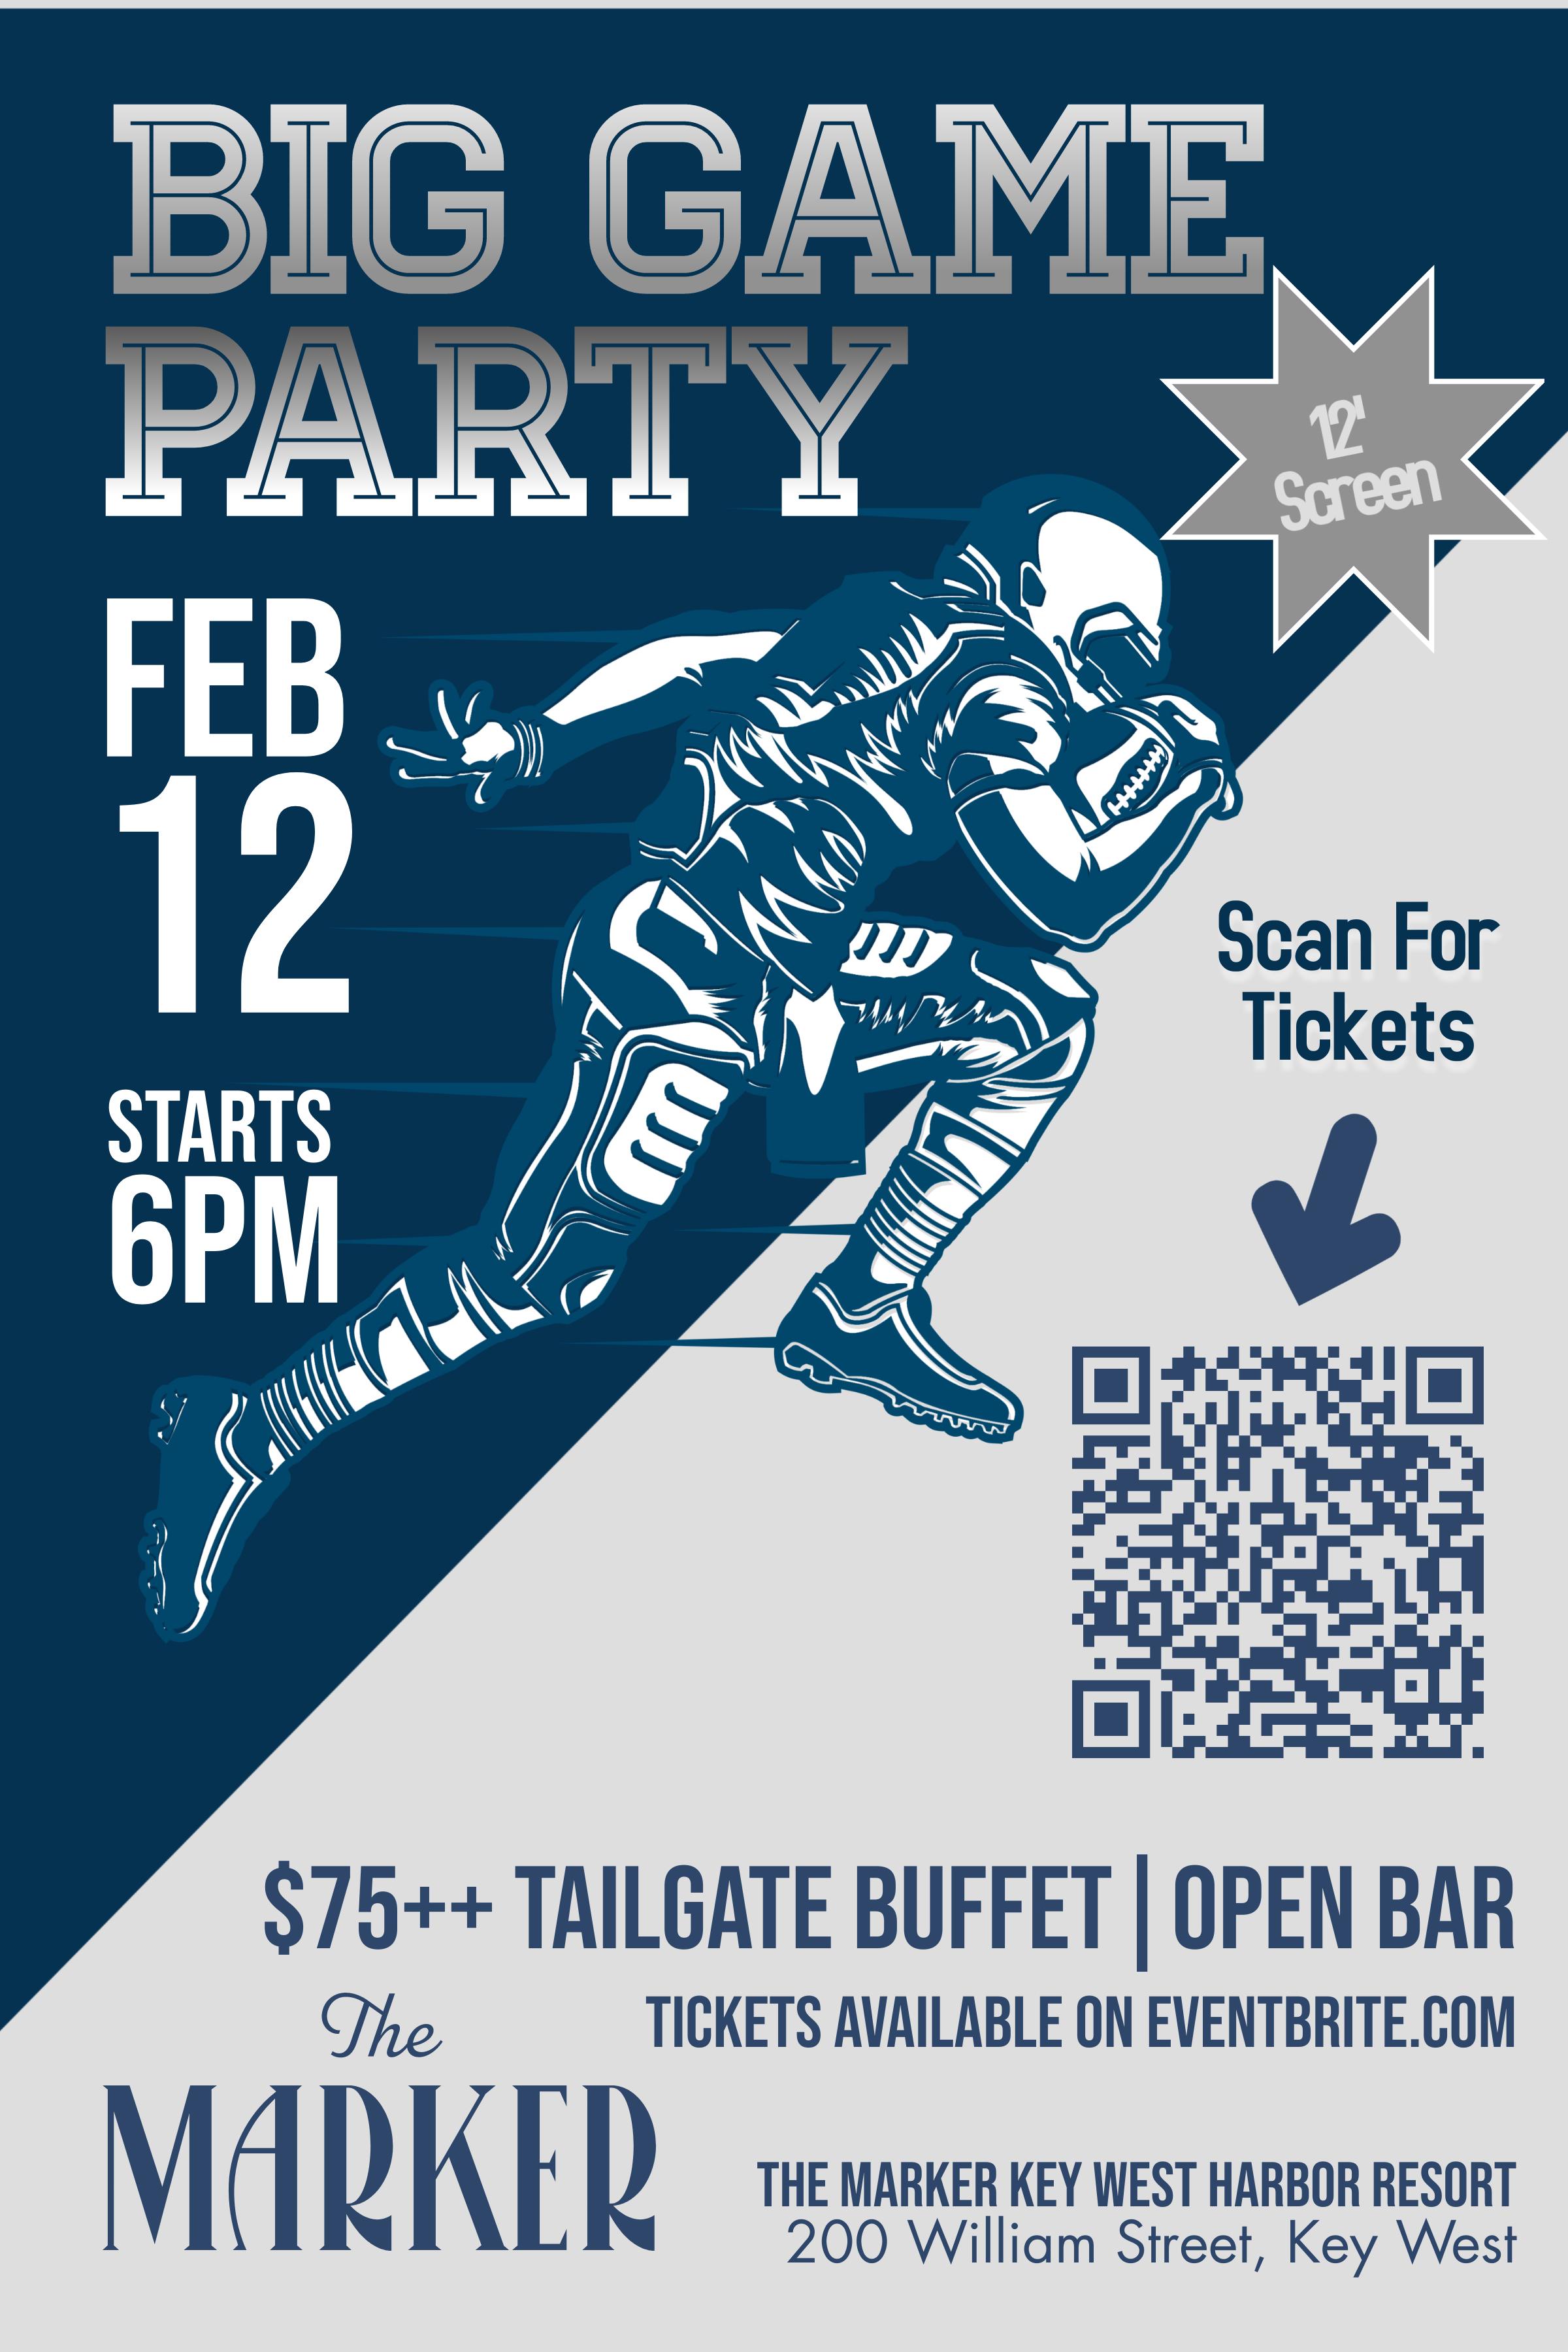 Big Game Tailgate & Watch Party at The Marker Key West